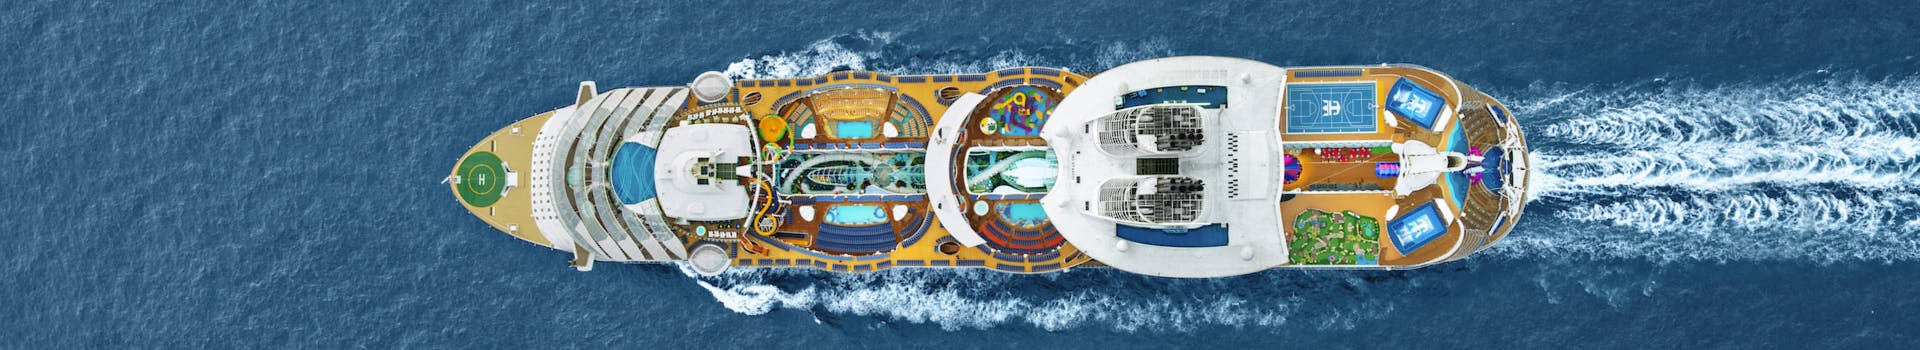 Symphony Of The Seas Youtube 2020 - Cruise Gallery